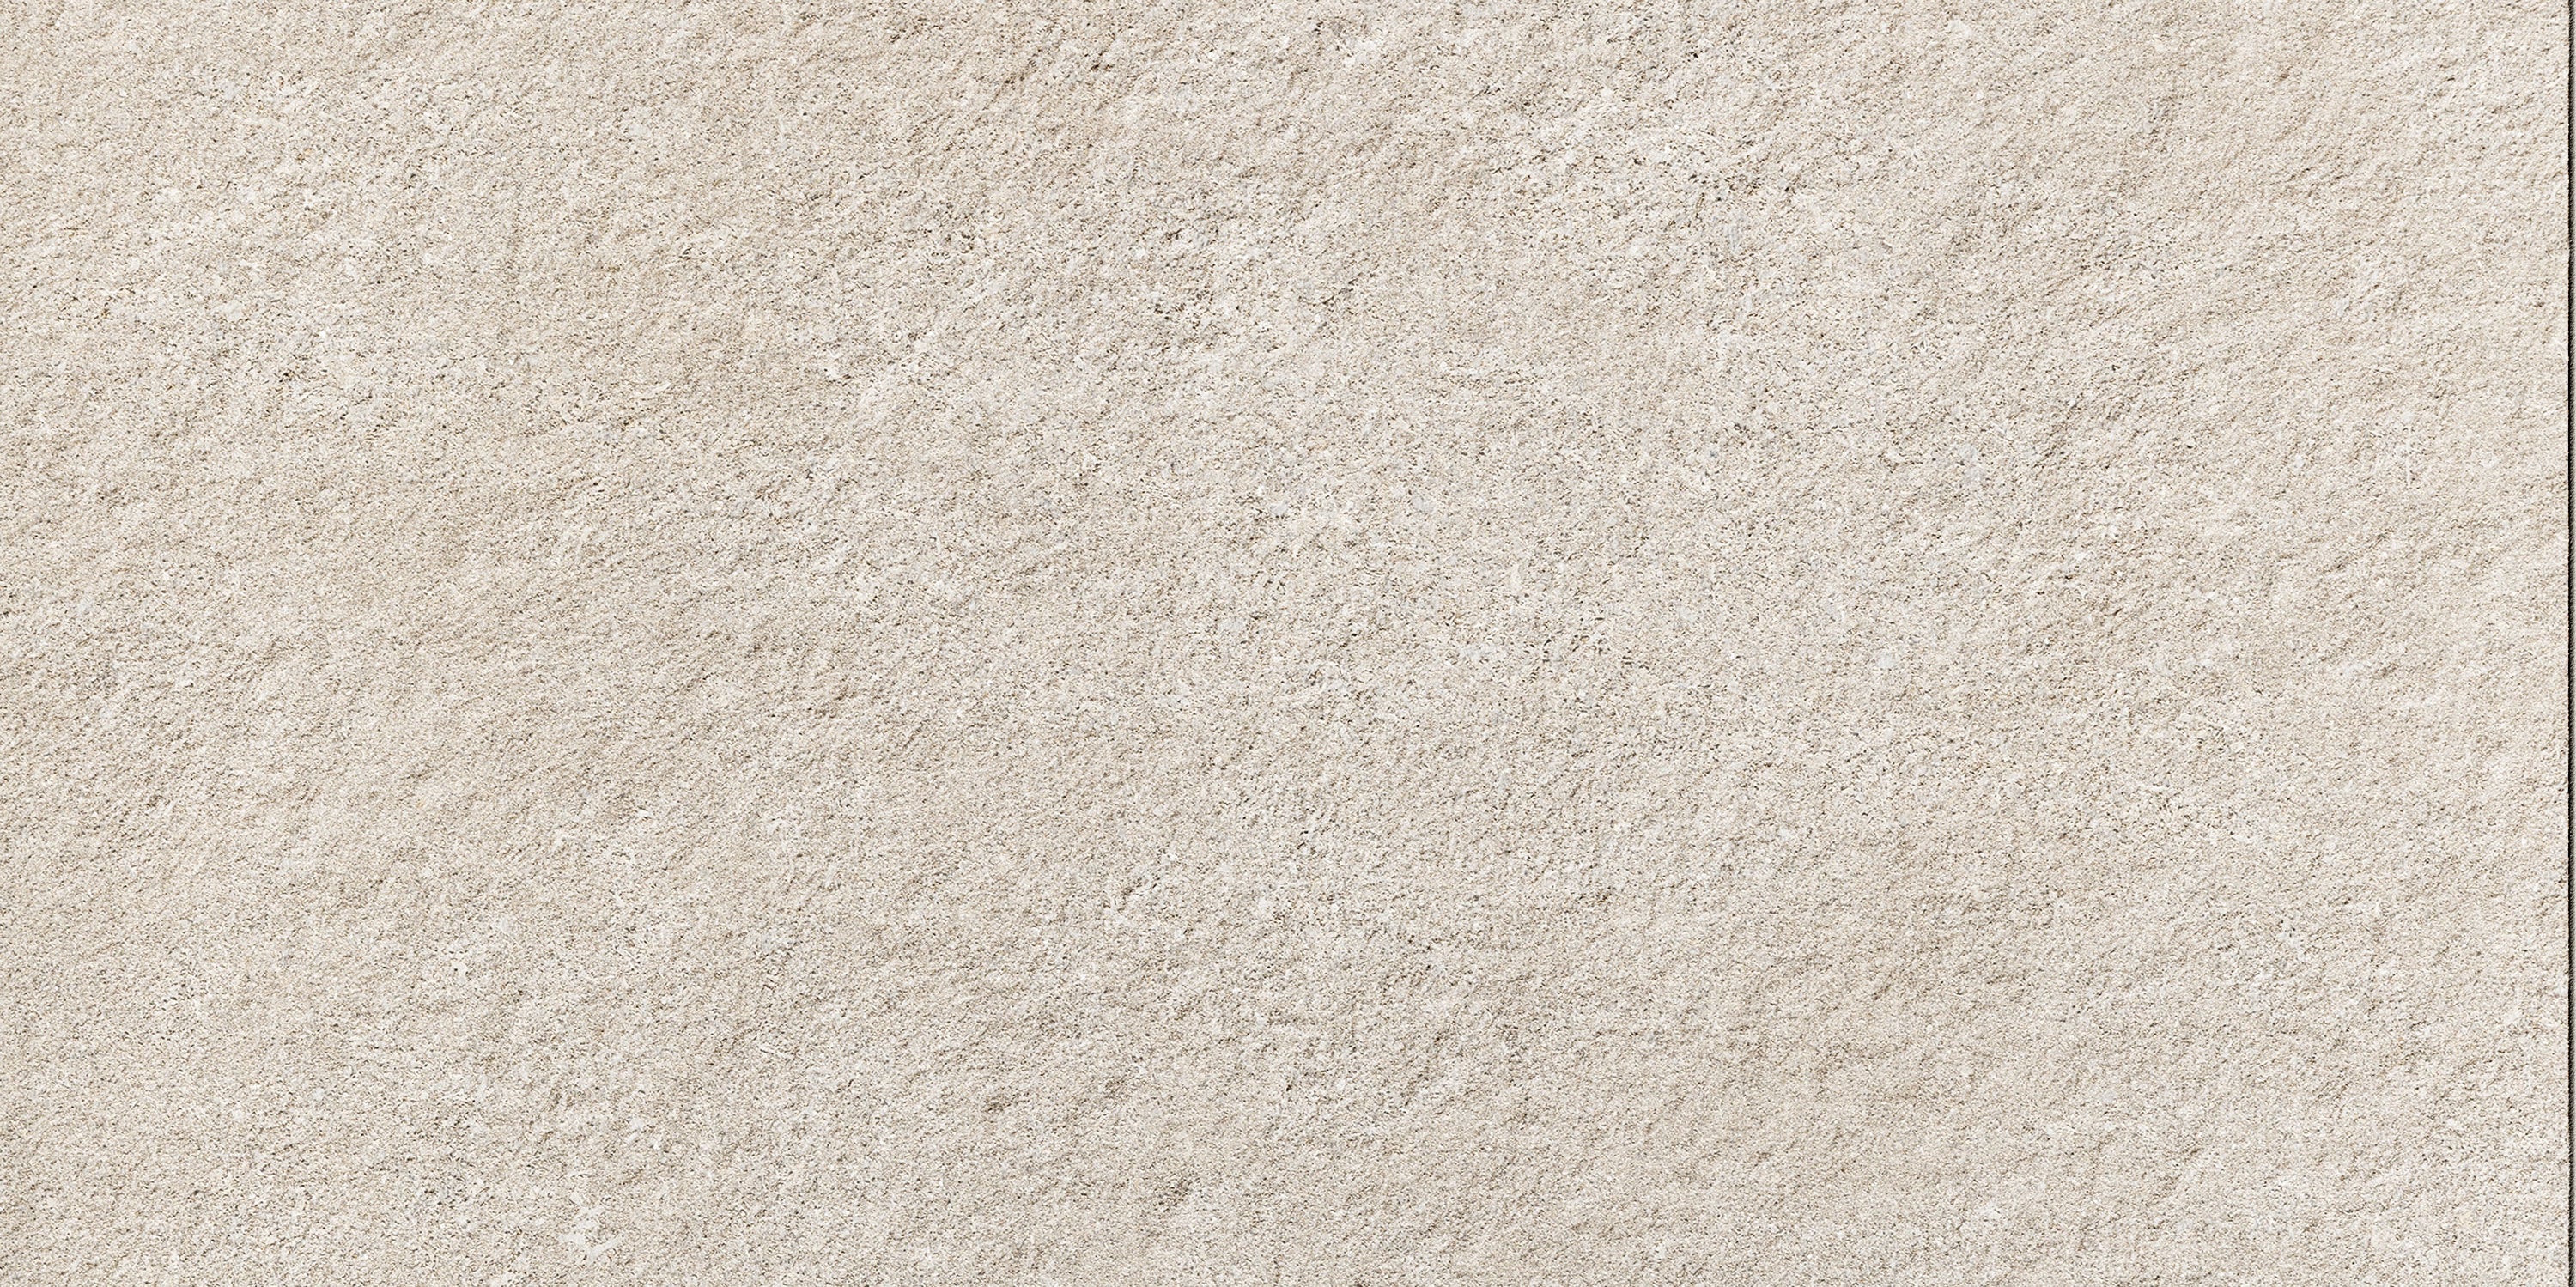 landmark frontier20 limestone indiana buff select paver tile 24x48x20mm matte rectified porcelain tile distributed by surface group international